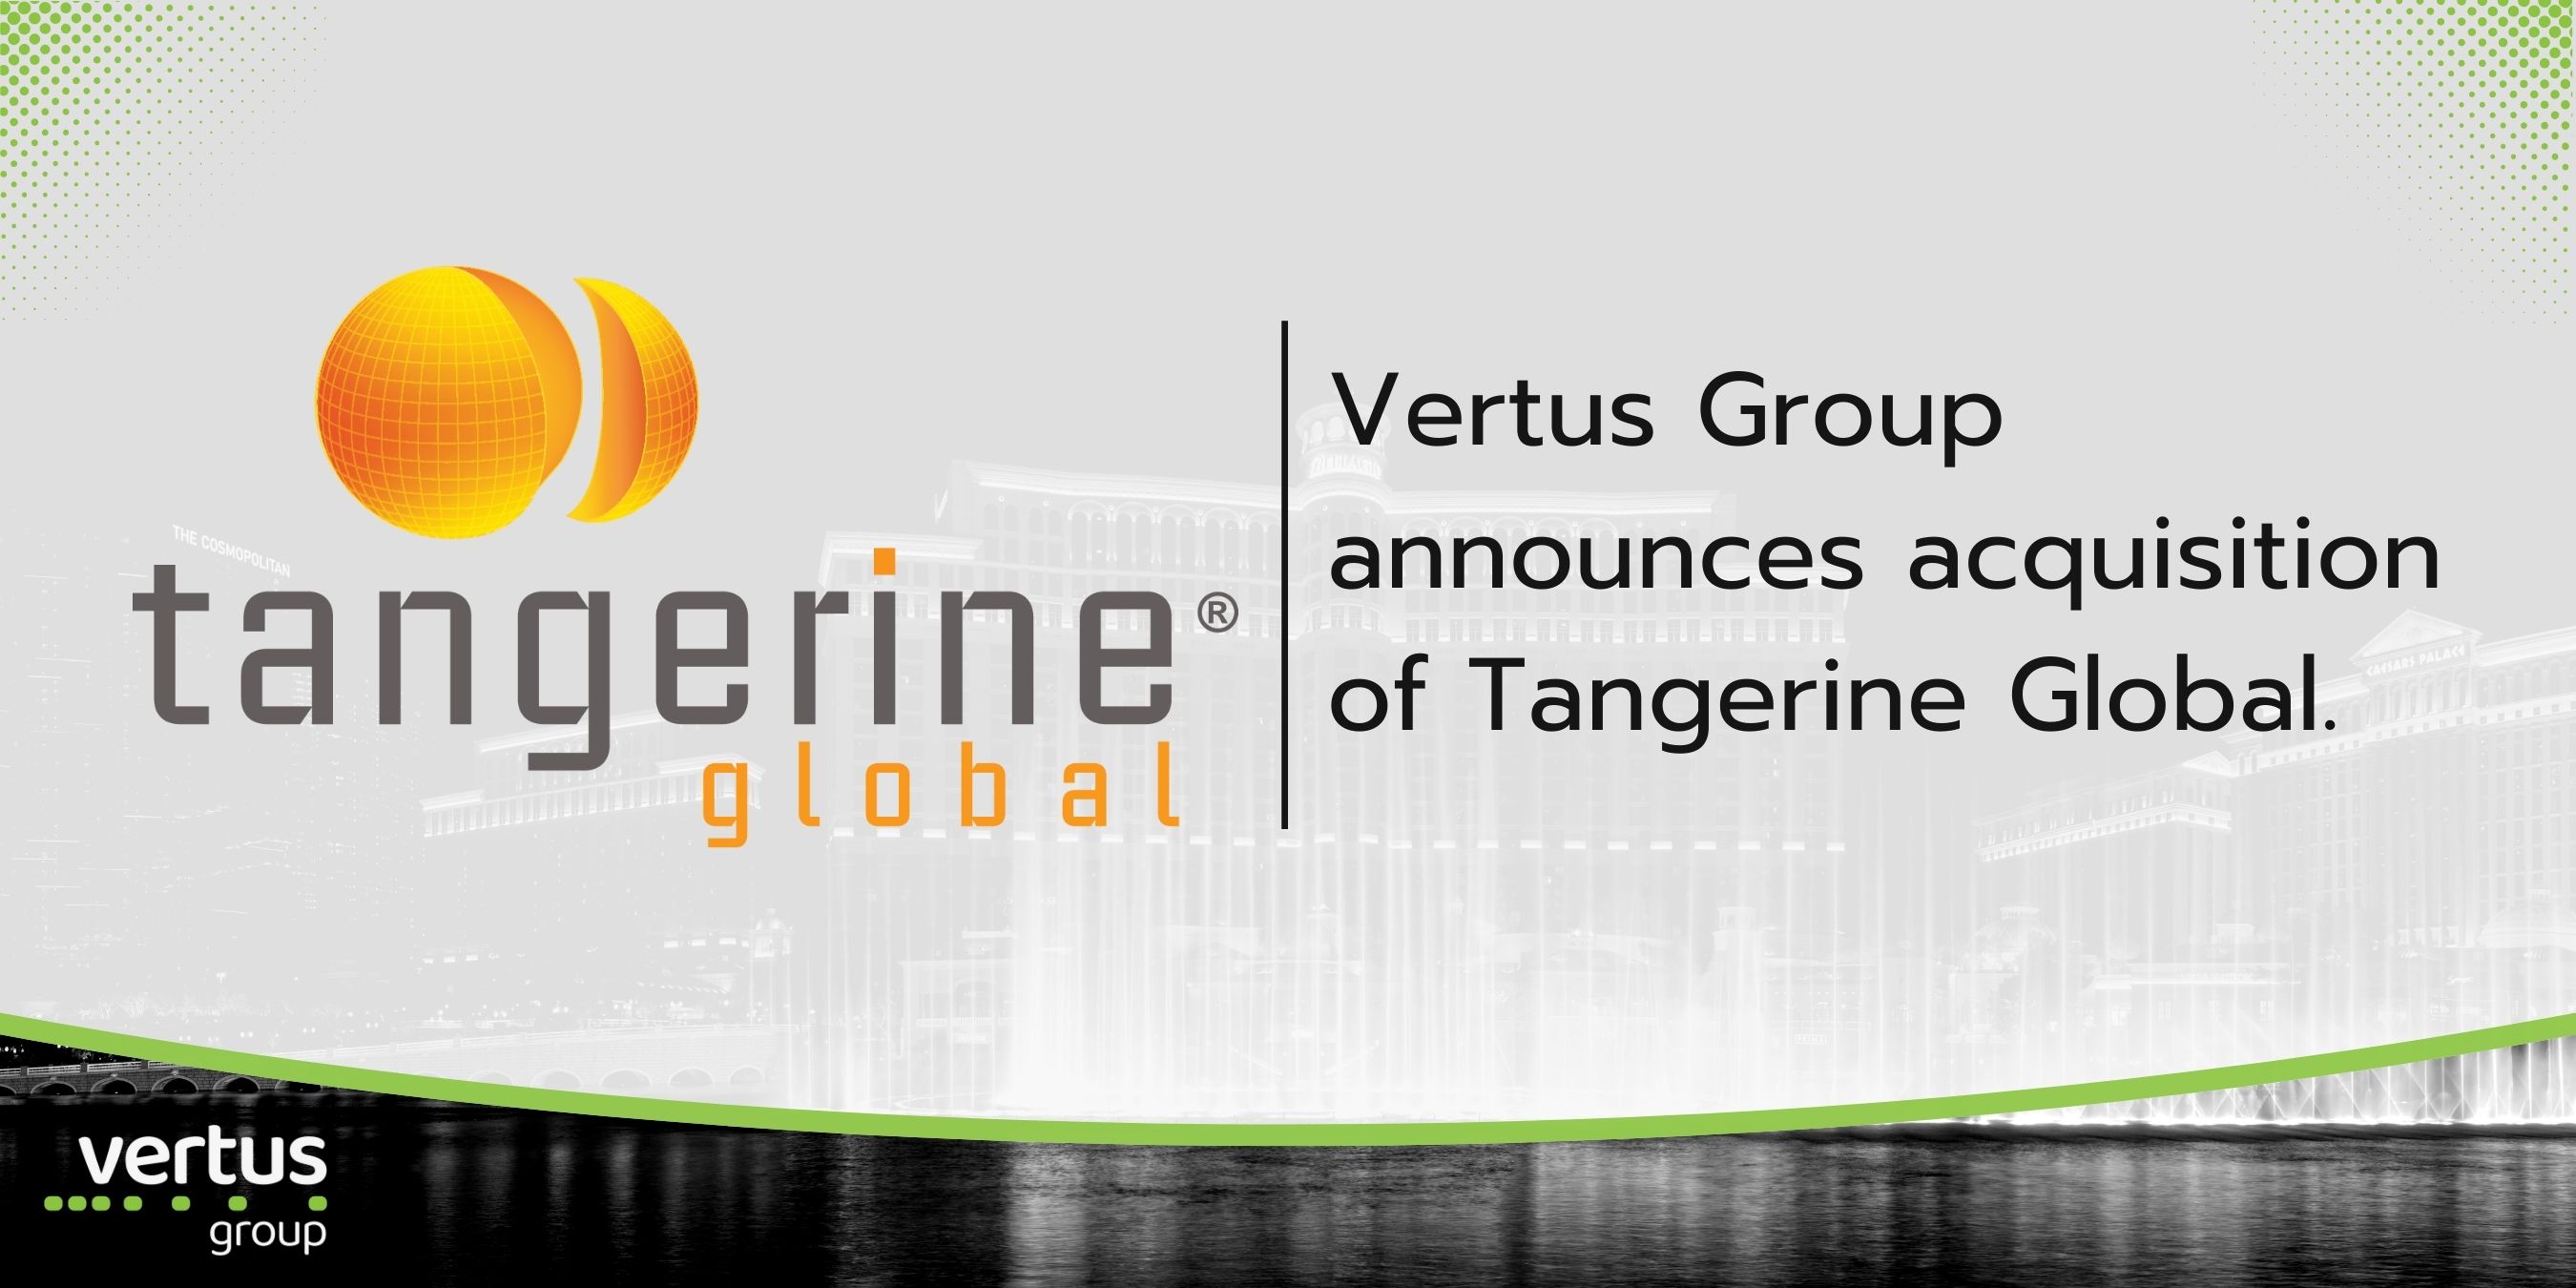 Acquisition: Tangerine Global